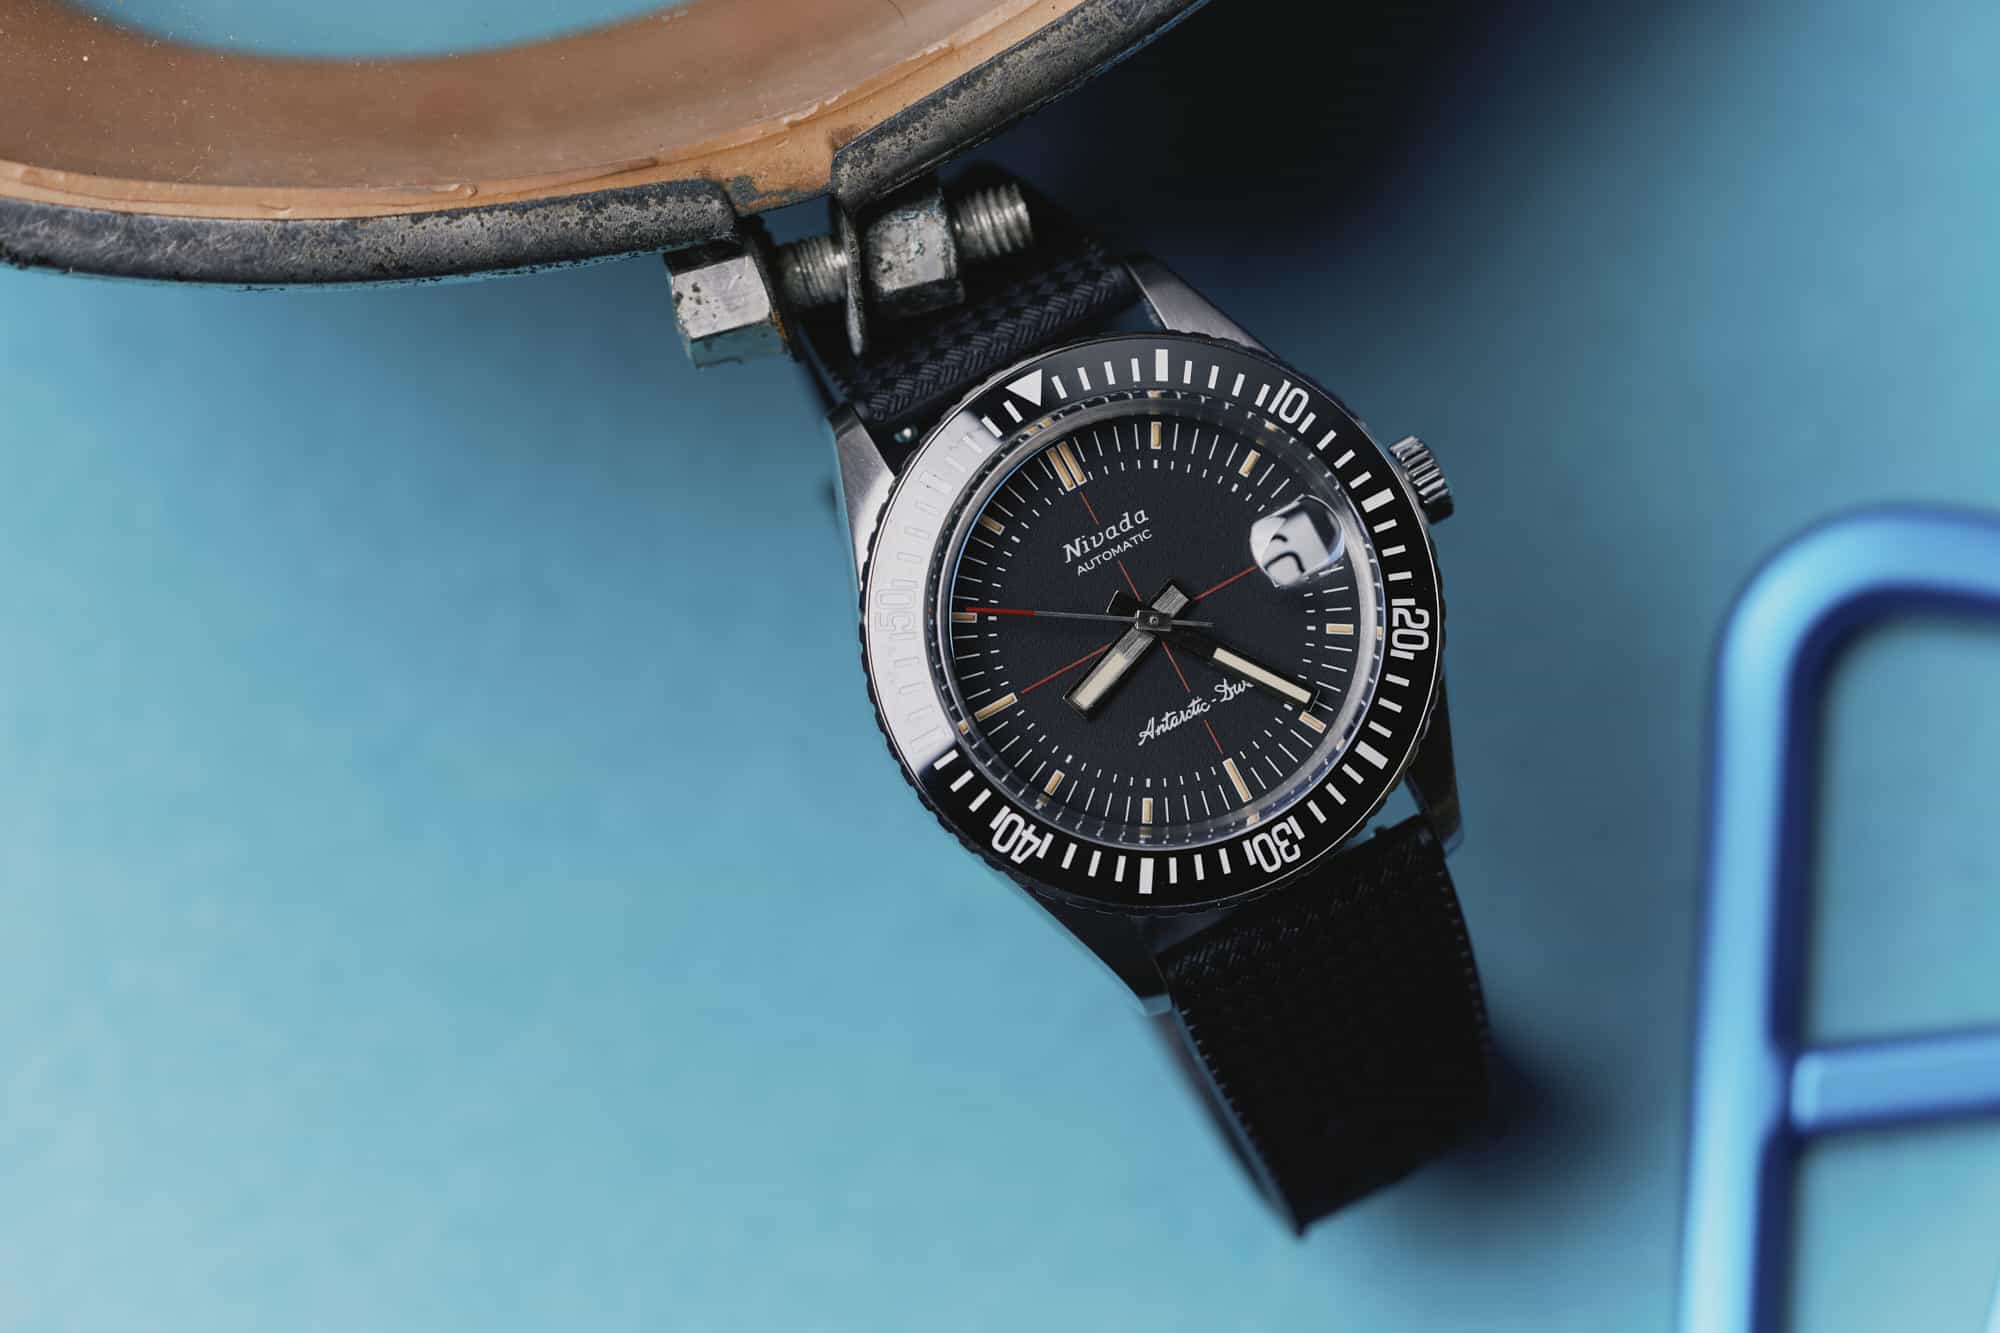 Hands-On: the Nivada Grenchen Antarctic Diver